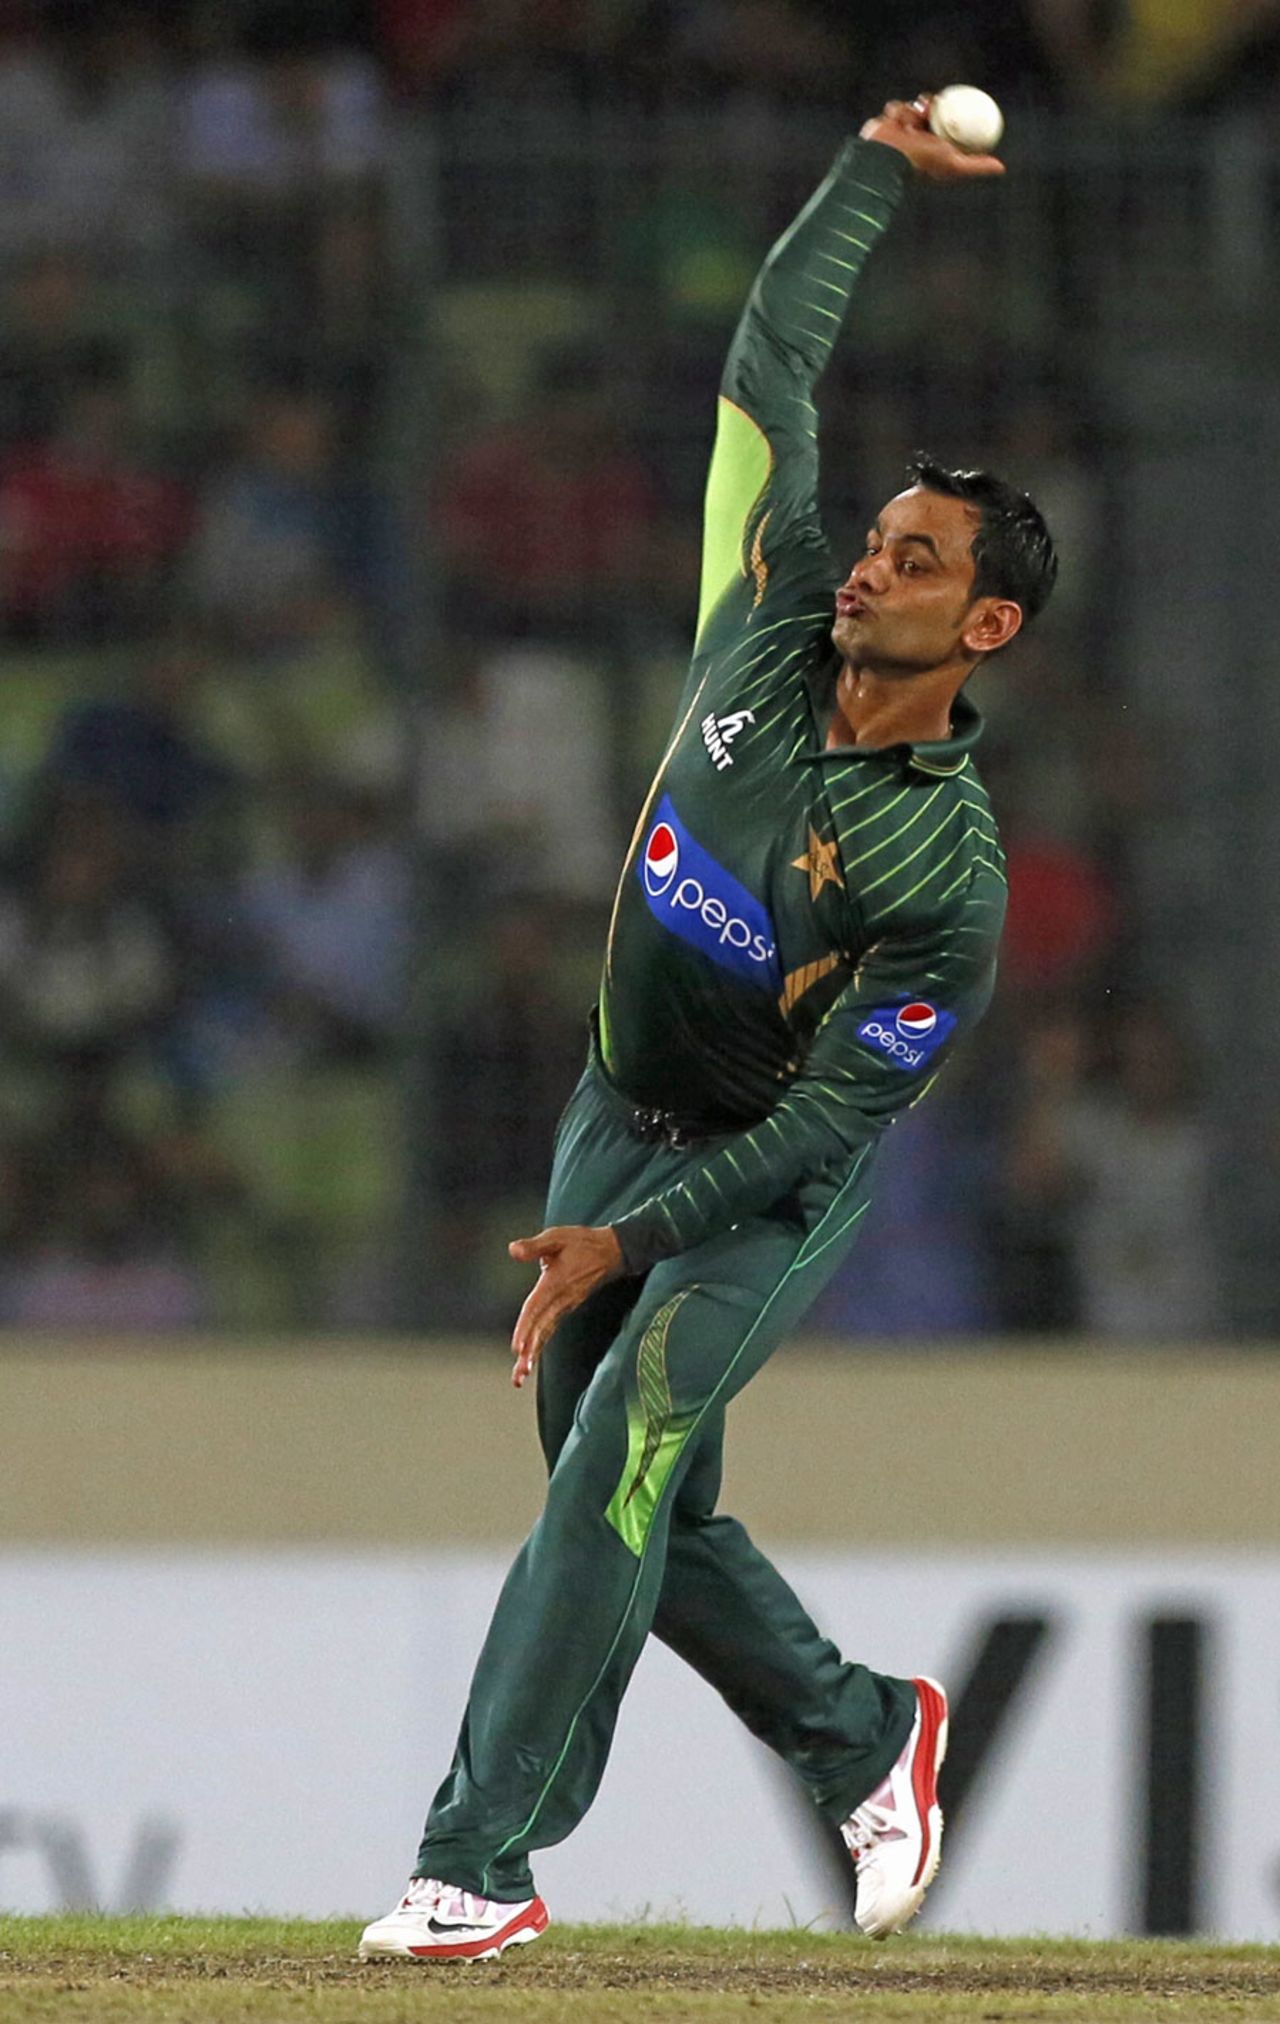 Mohammad Hafeez bowls for the first time in an international game after his remodelled action was cleared by the ICC, Bangladesh v Pakistan, 3rd ODI, Mirpur, April 22, 2015